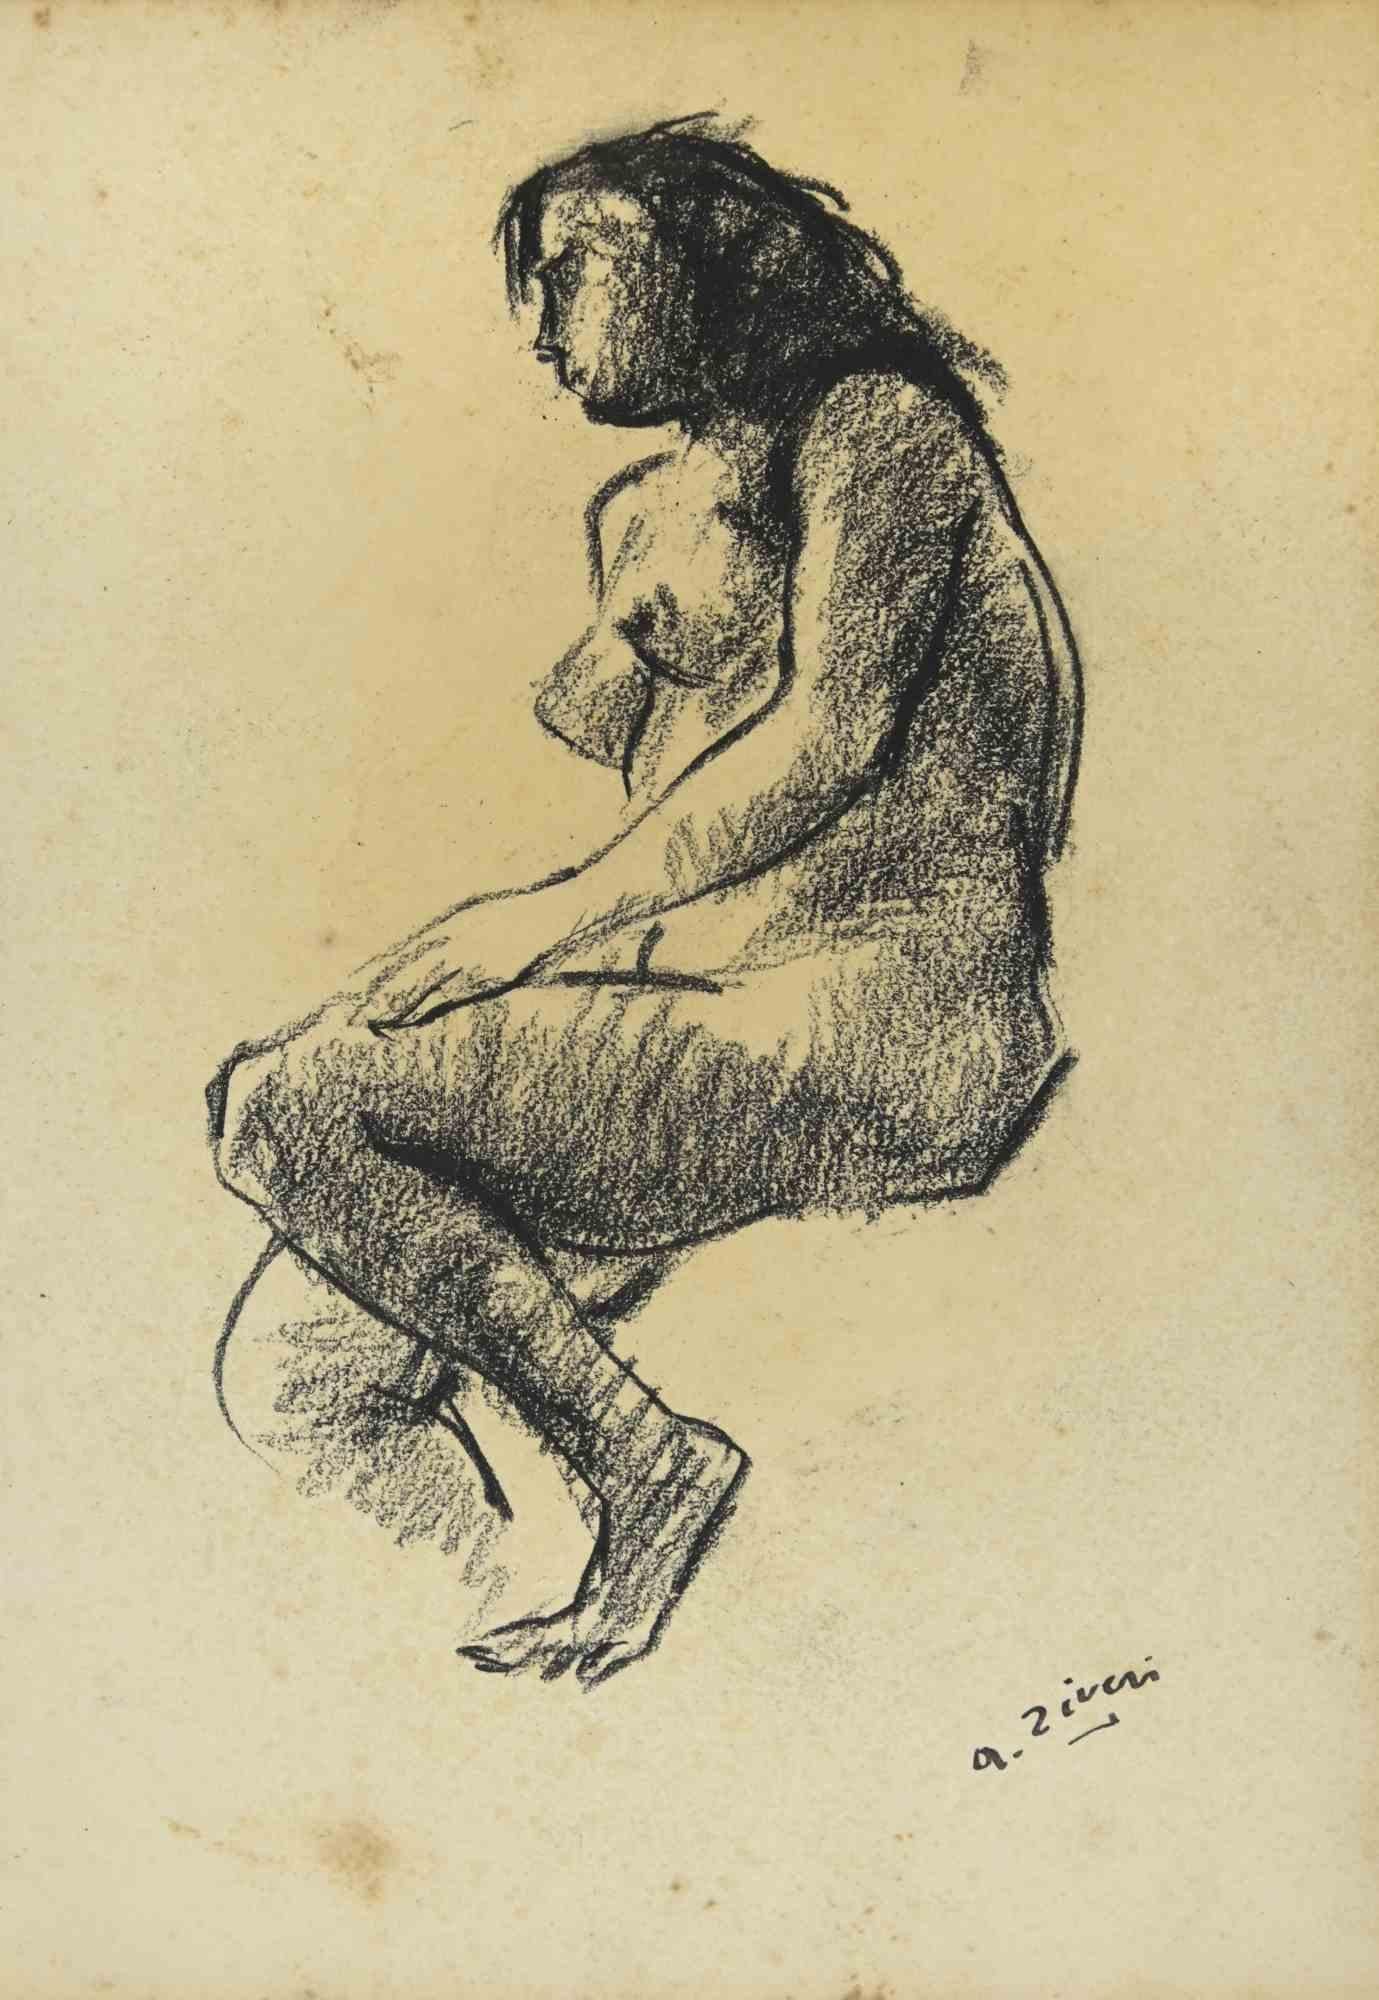 Nude - Drawing by Alberto Ziveri - 1930s